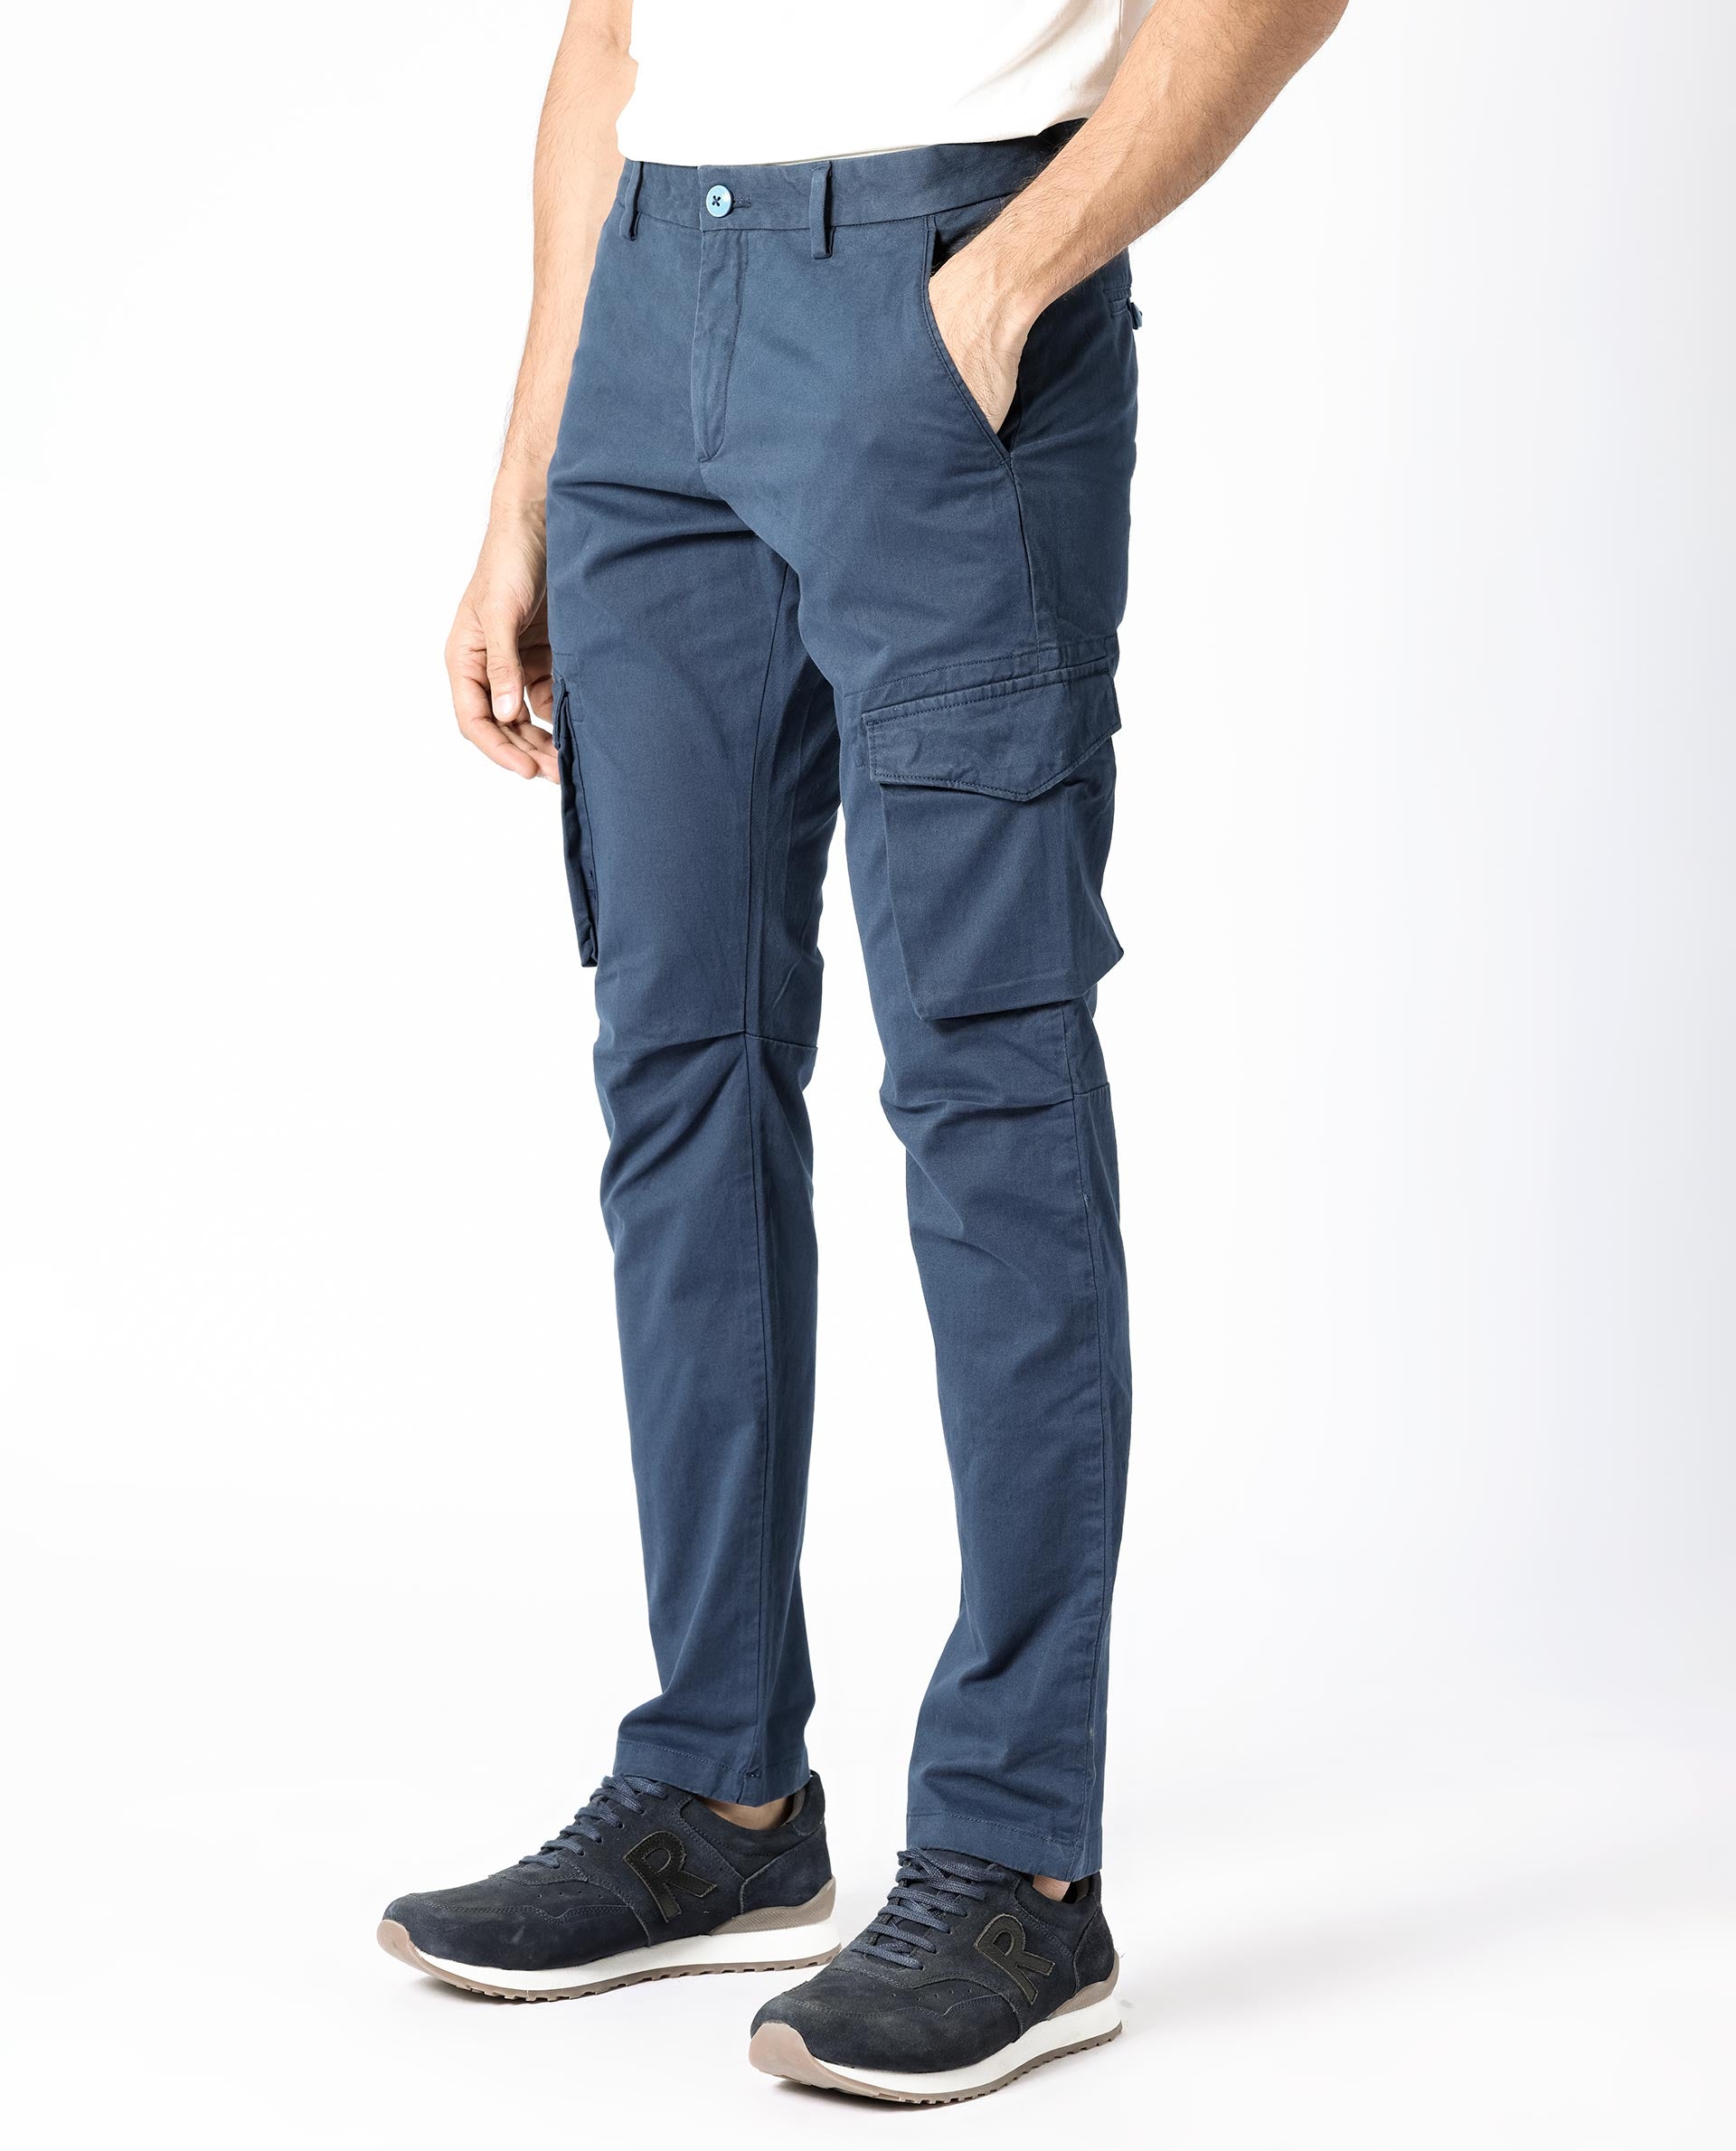 Rio Fashion Standard Trendy Cotton Solid Men's Cargo Pants Multiple  Color-Blue/Yellow - flybuy.in